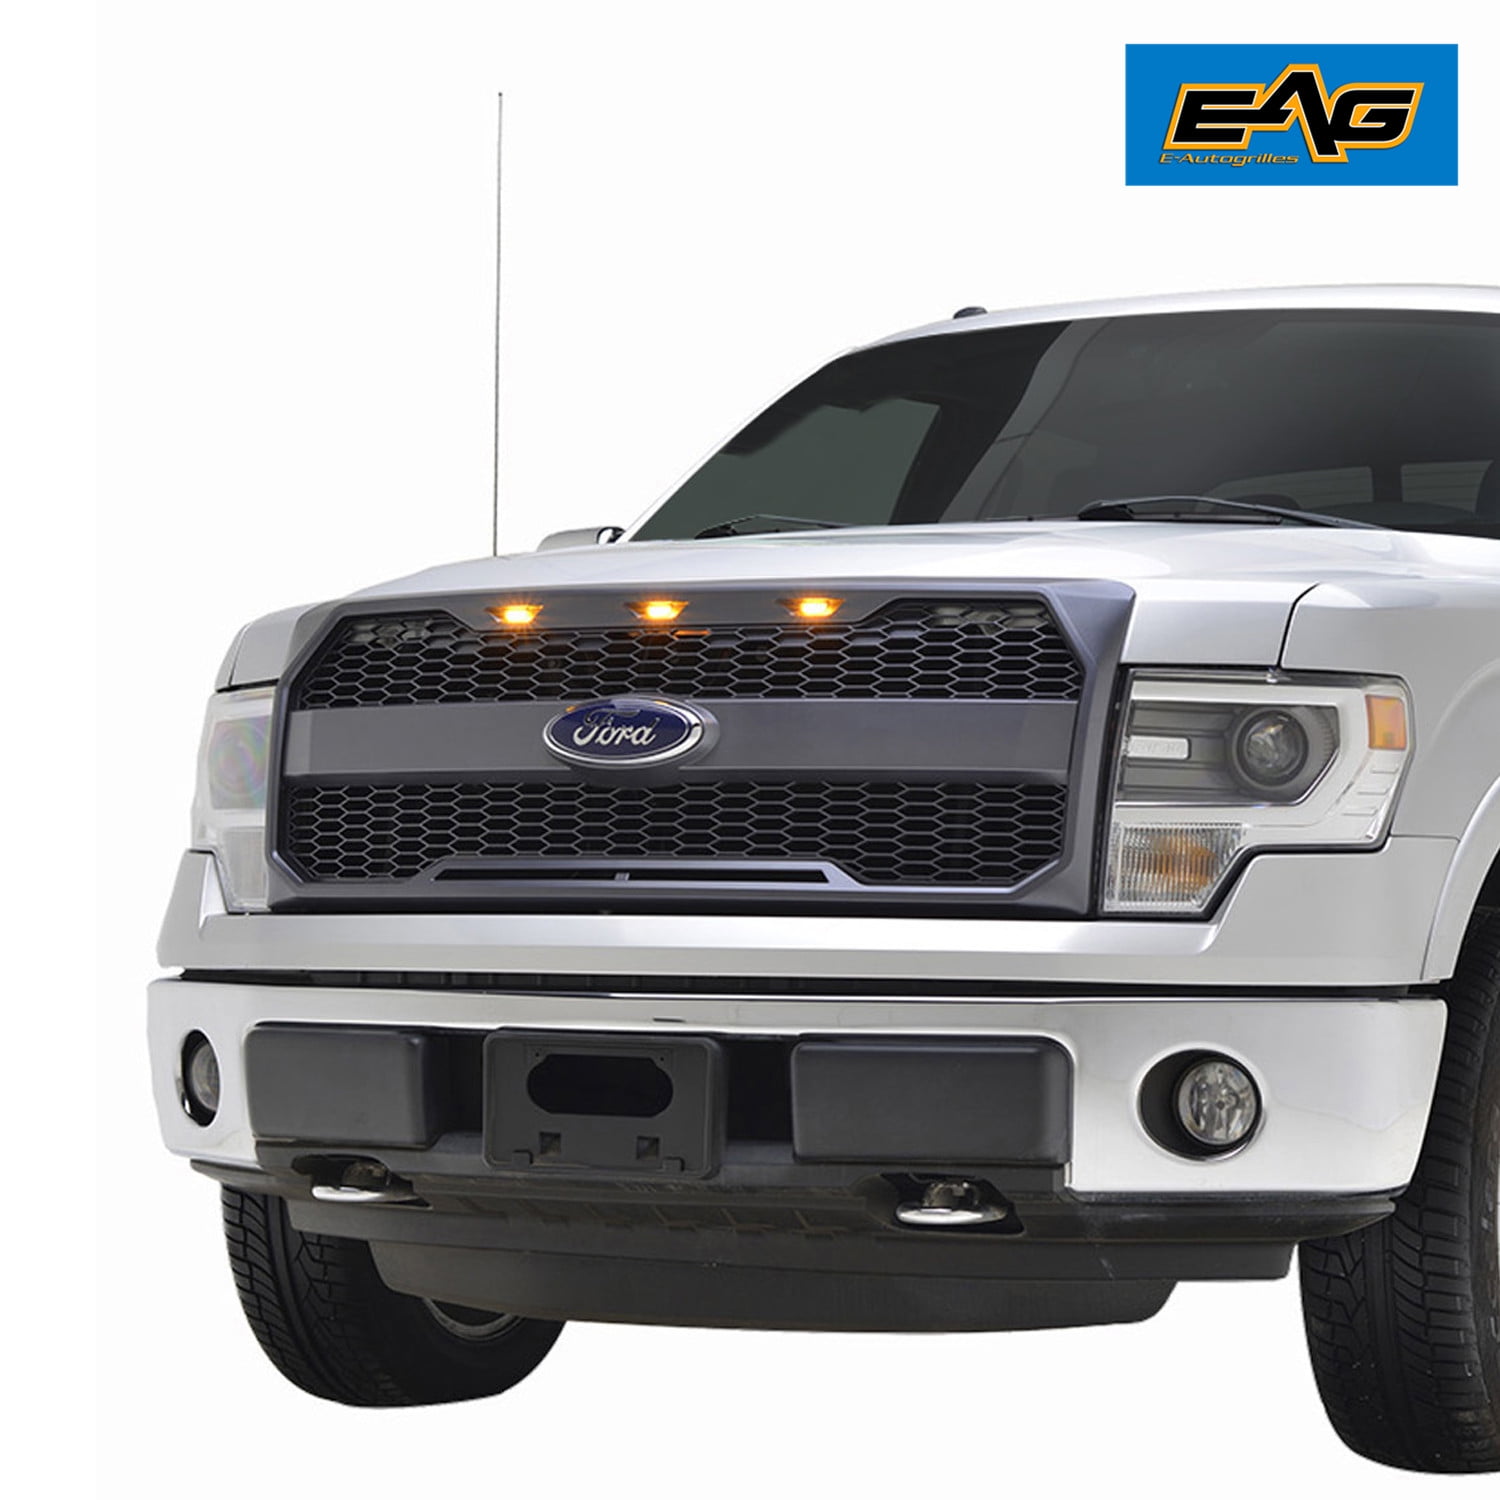 EAG Replacement Upper Grille Front Grill with Amber LED Lights for 09-14 Ford F150 Matte Black 